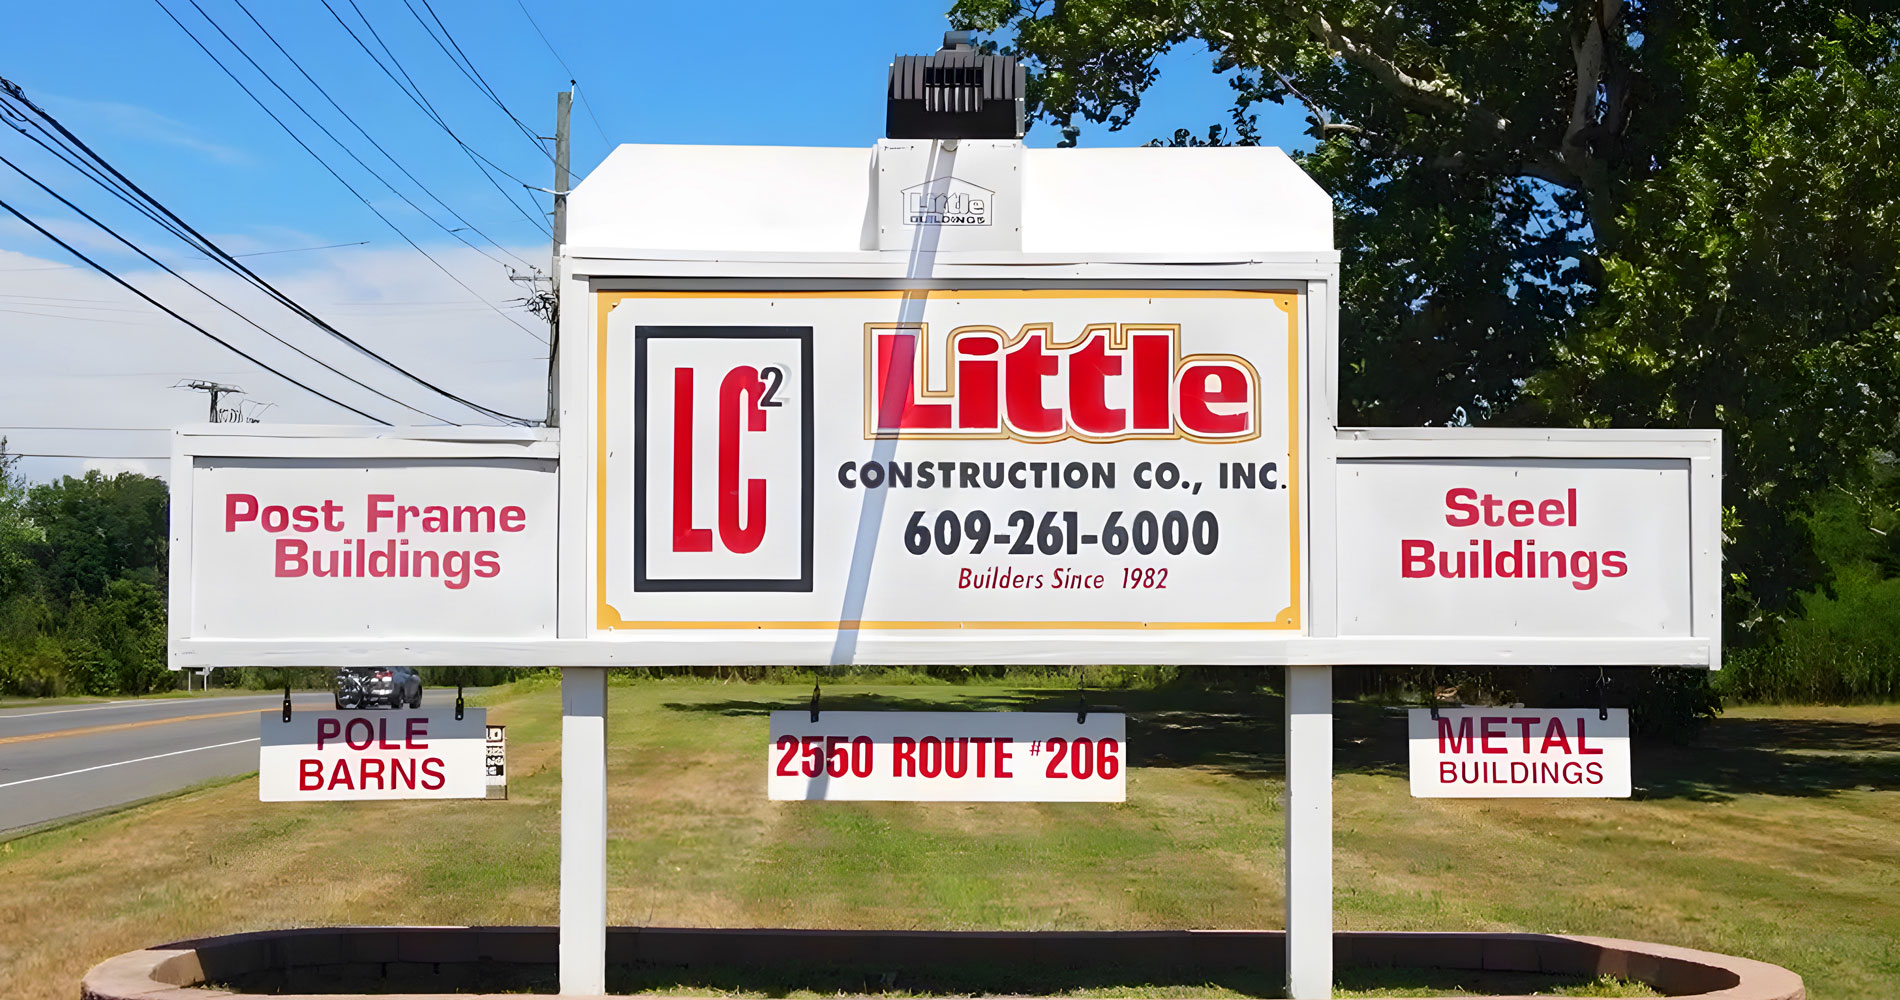 Post Frame Construction Buildings in New Jersey | Little Construction Co., Inc.